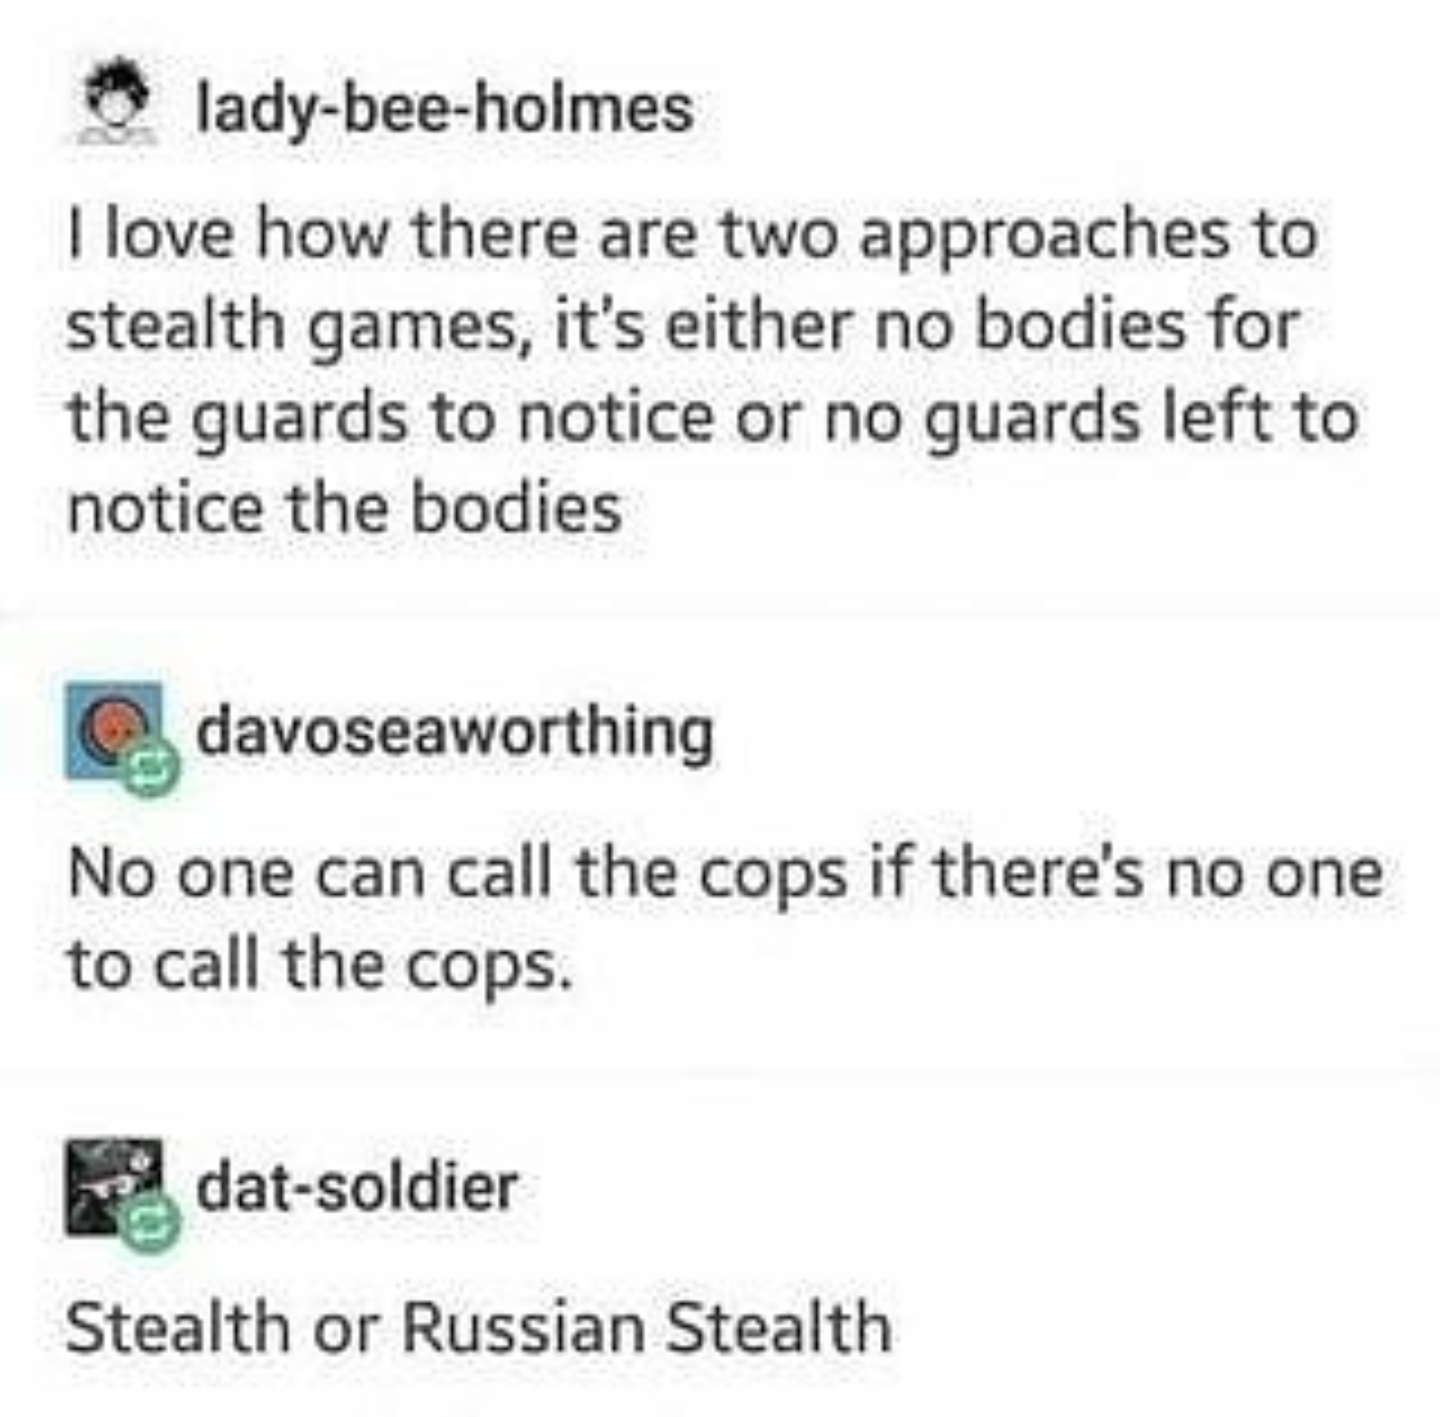 document - ladybeeholmes I love how there are two approaches to stealth games, it's either no bodies for the guards to notice or no quards left to notice the bodies davoseaworthing No one can call the cops if there's no one to call the cops. datsoldier St